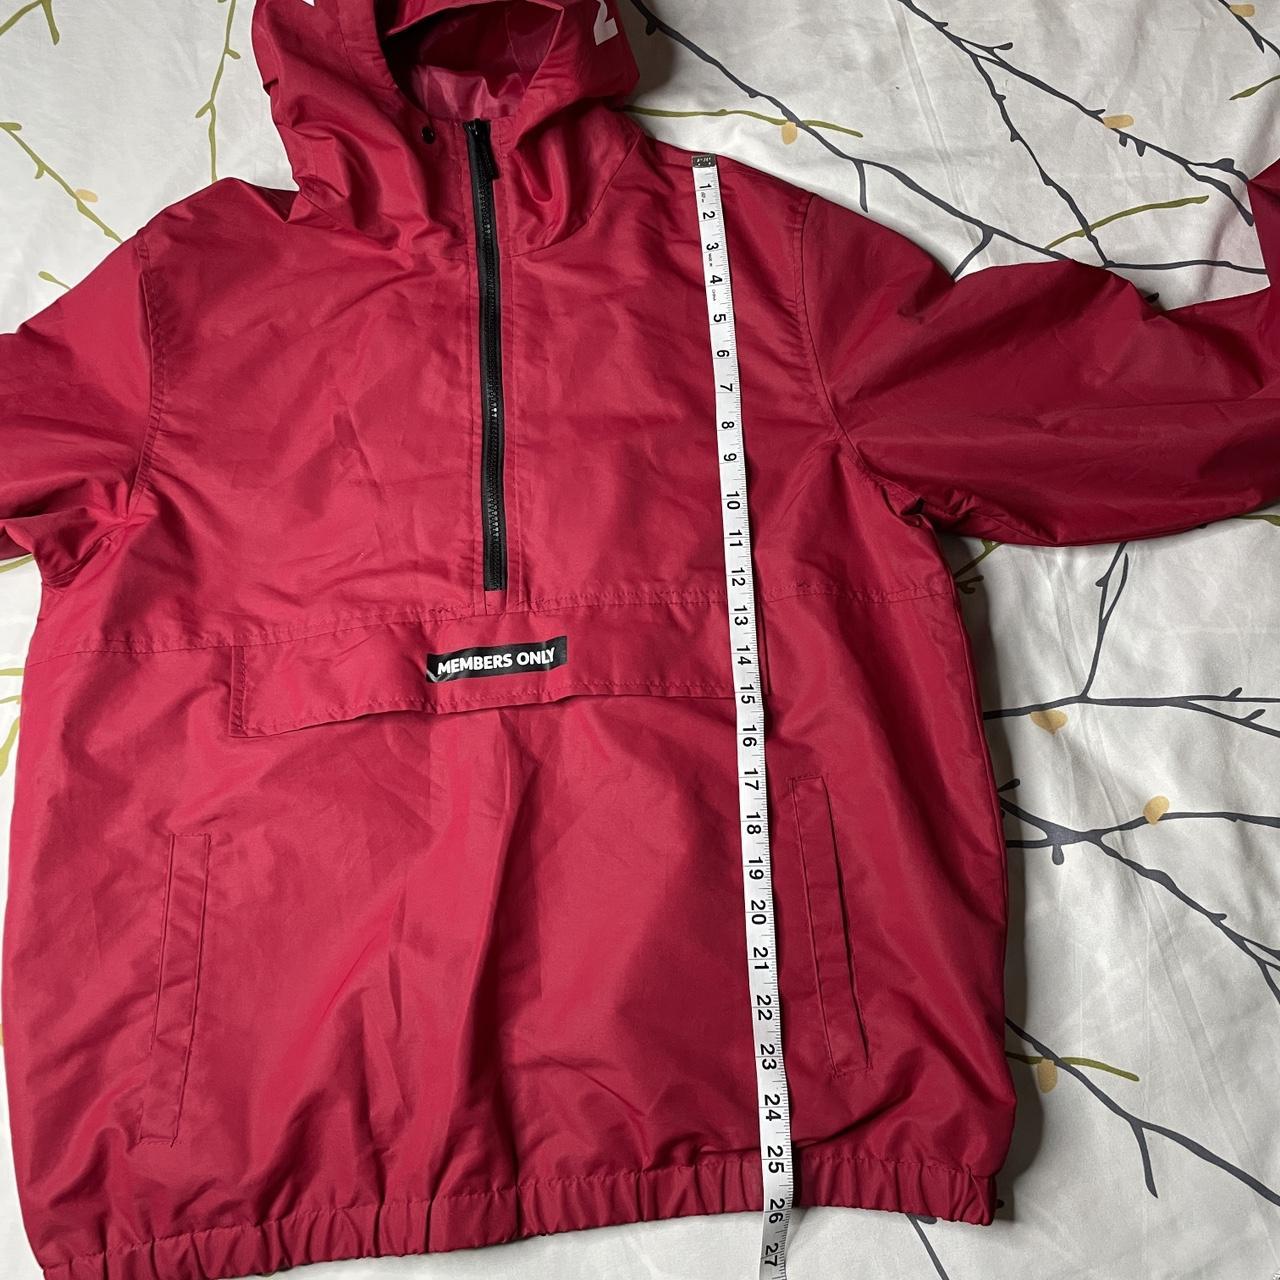 Members Only Men's Red Jacket (8)